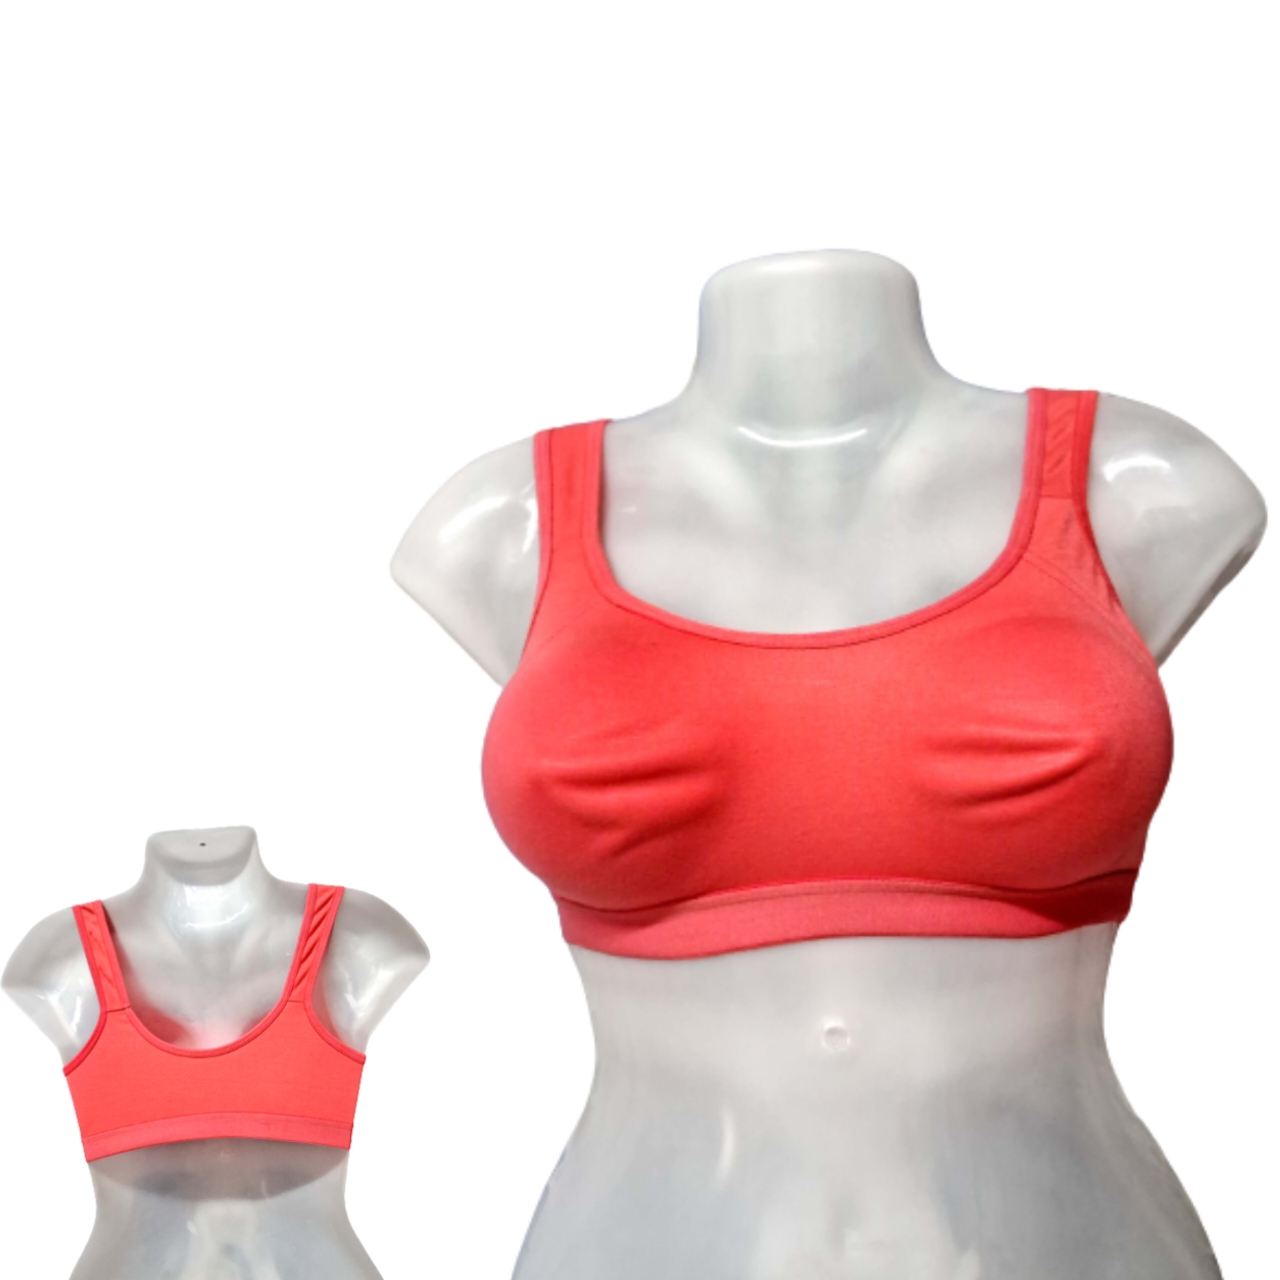 Shapyfy Super Comfy Sports Bra | Without Pad | Skin Friendly Elastics | Red Color